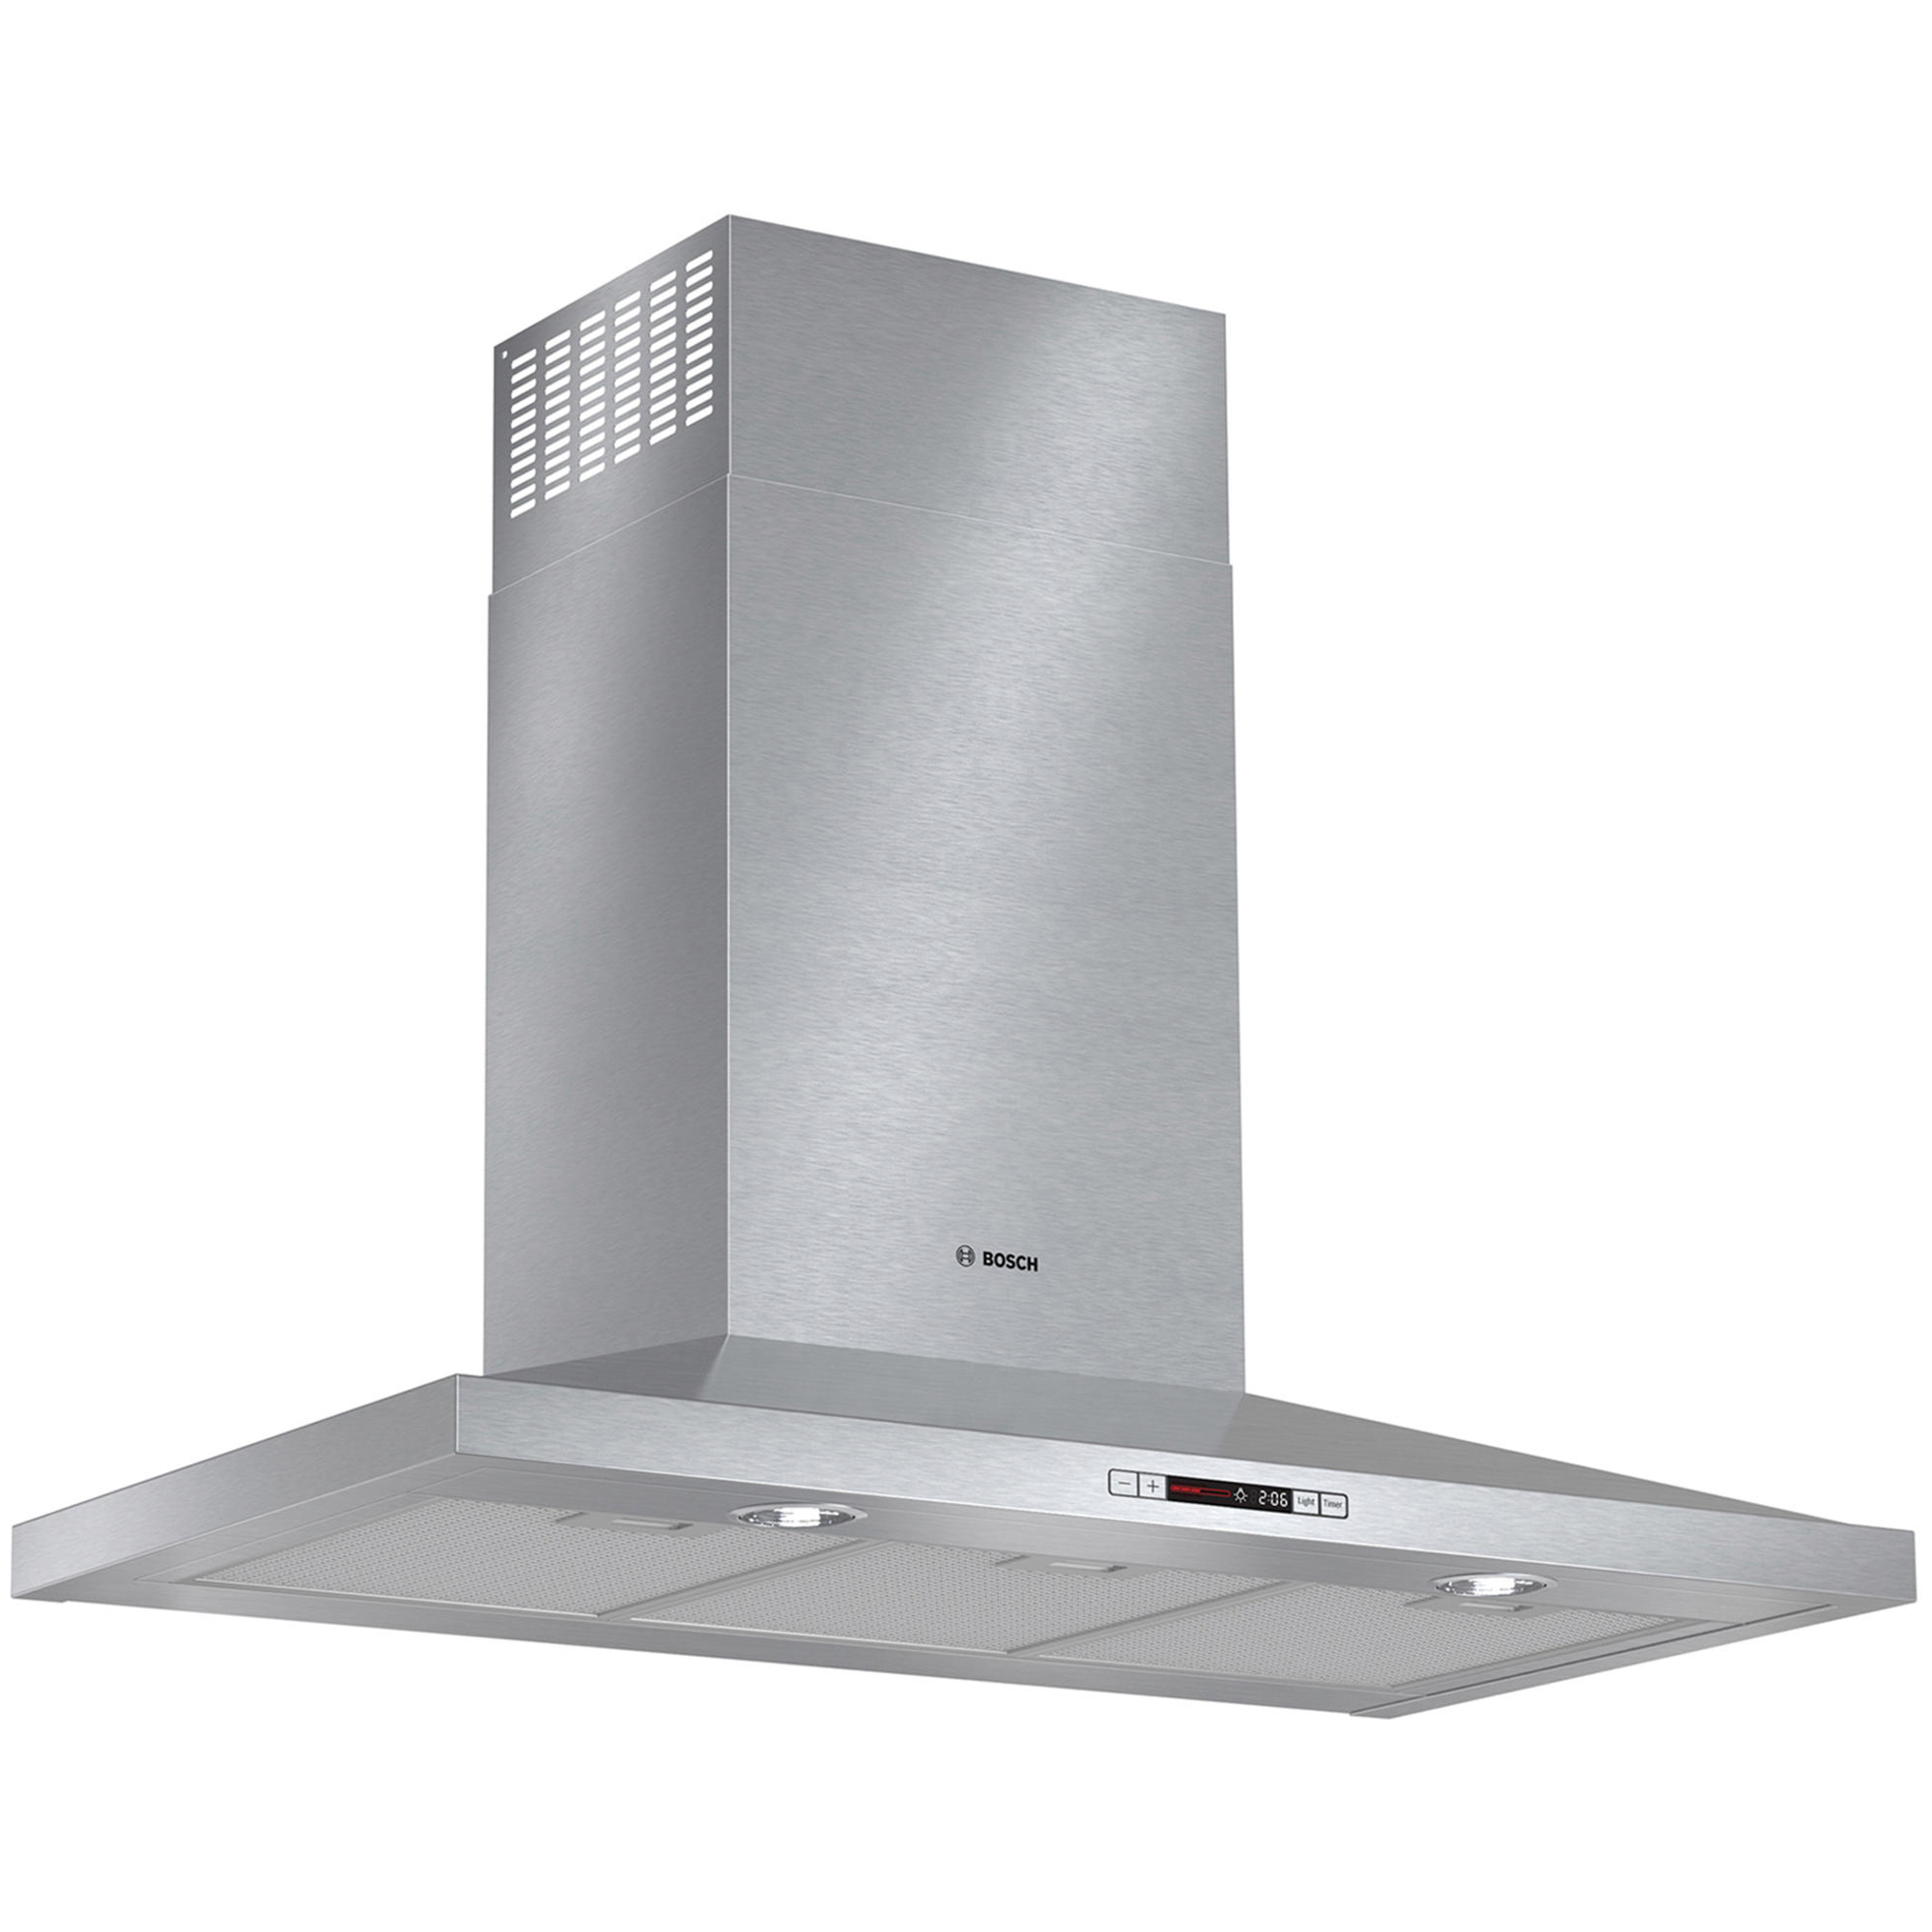 Bosch HCP36651UC  300 Series 36" Pyramid Style Canopy Hood - Stainless Steel